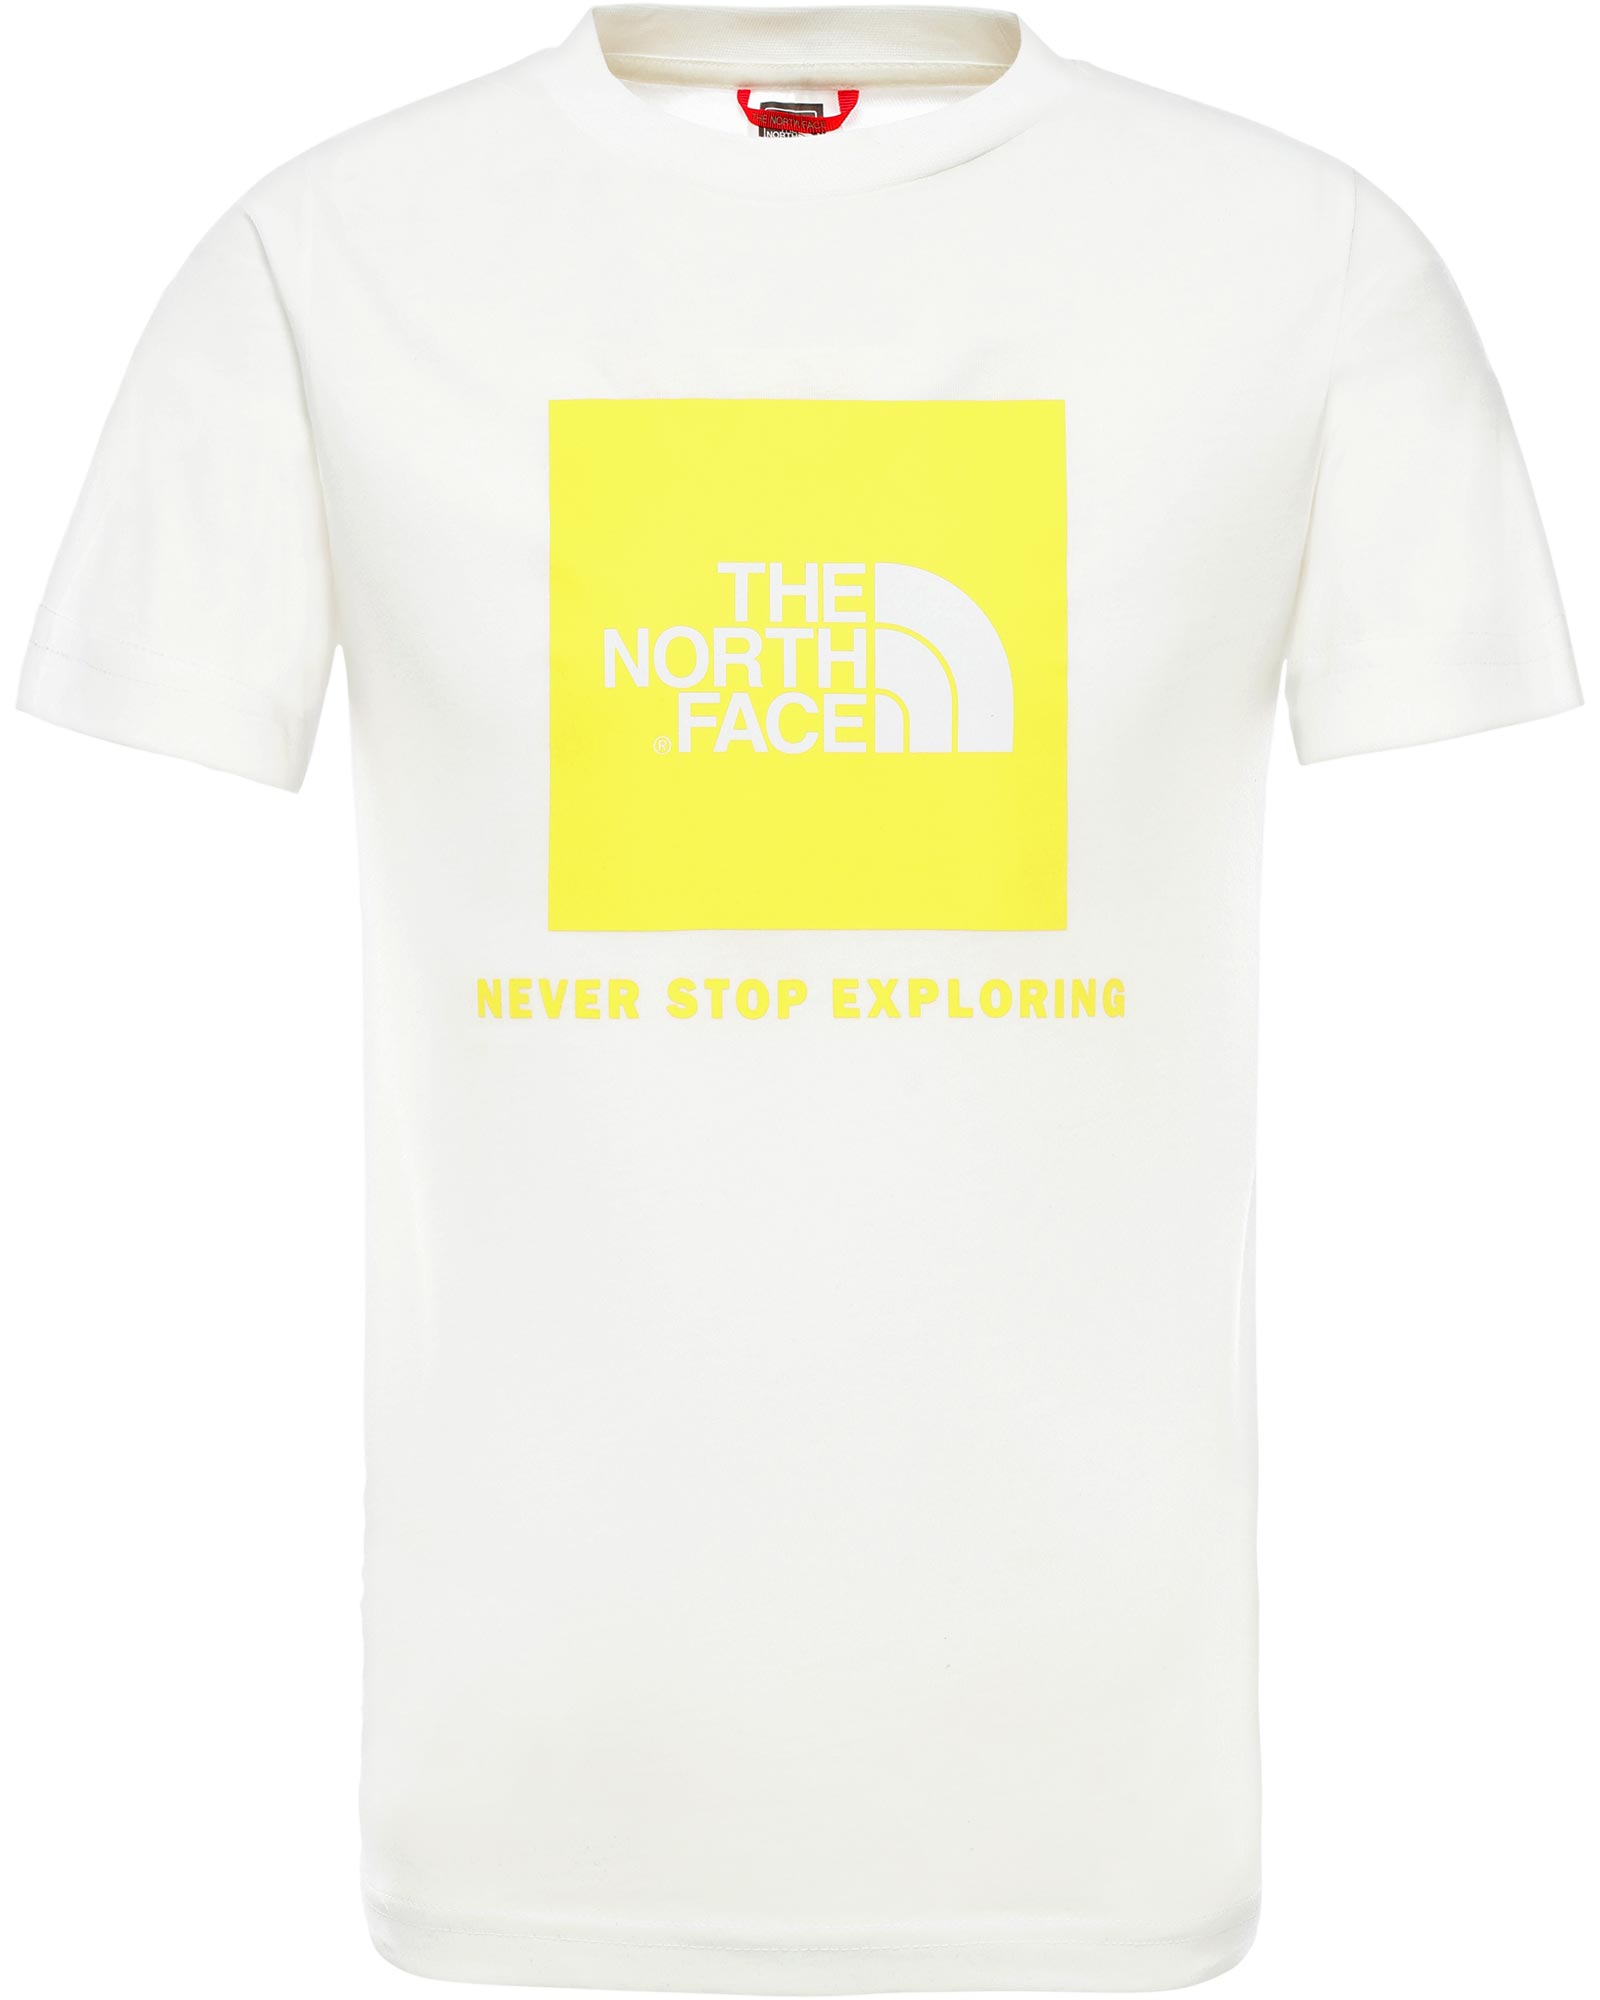 The North Face Box Kids’ T Shirt - TNF White/Yellow S